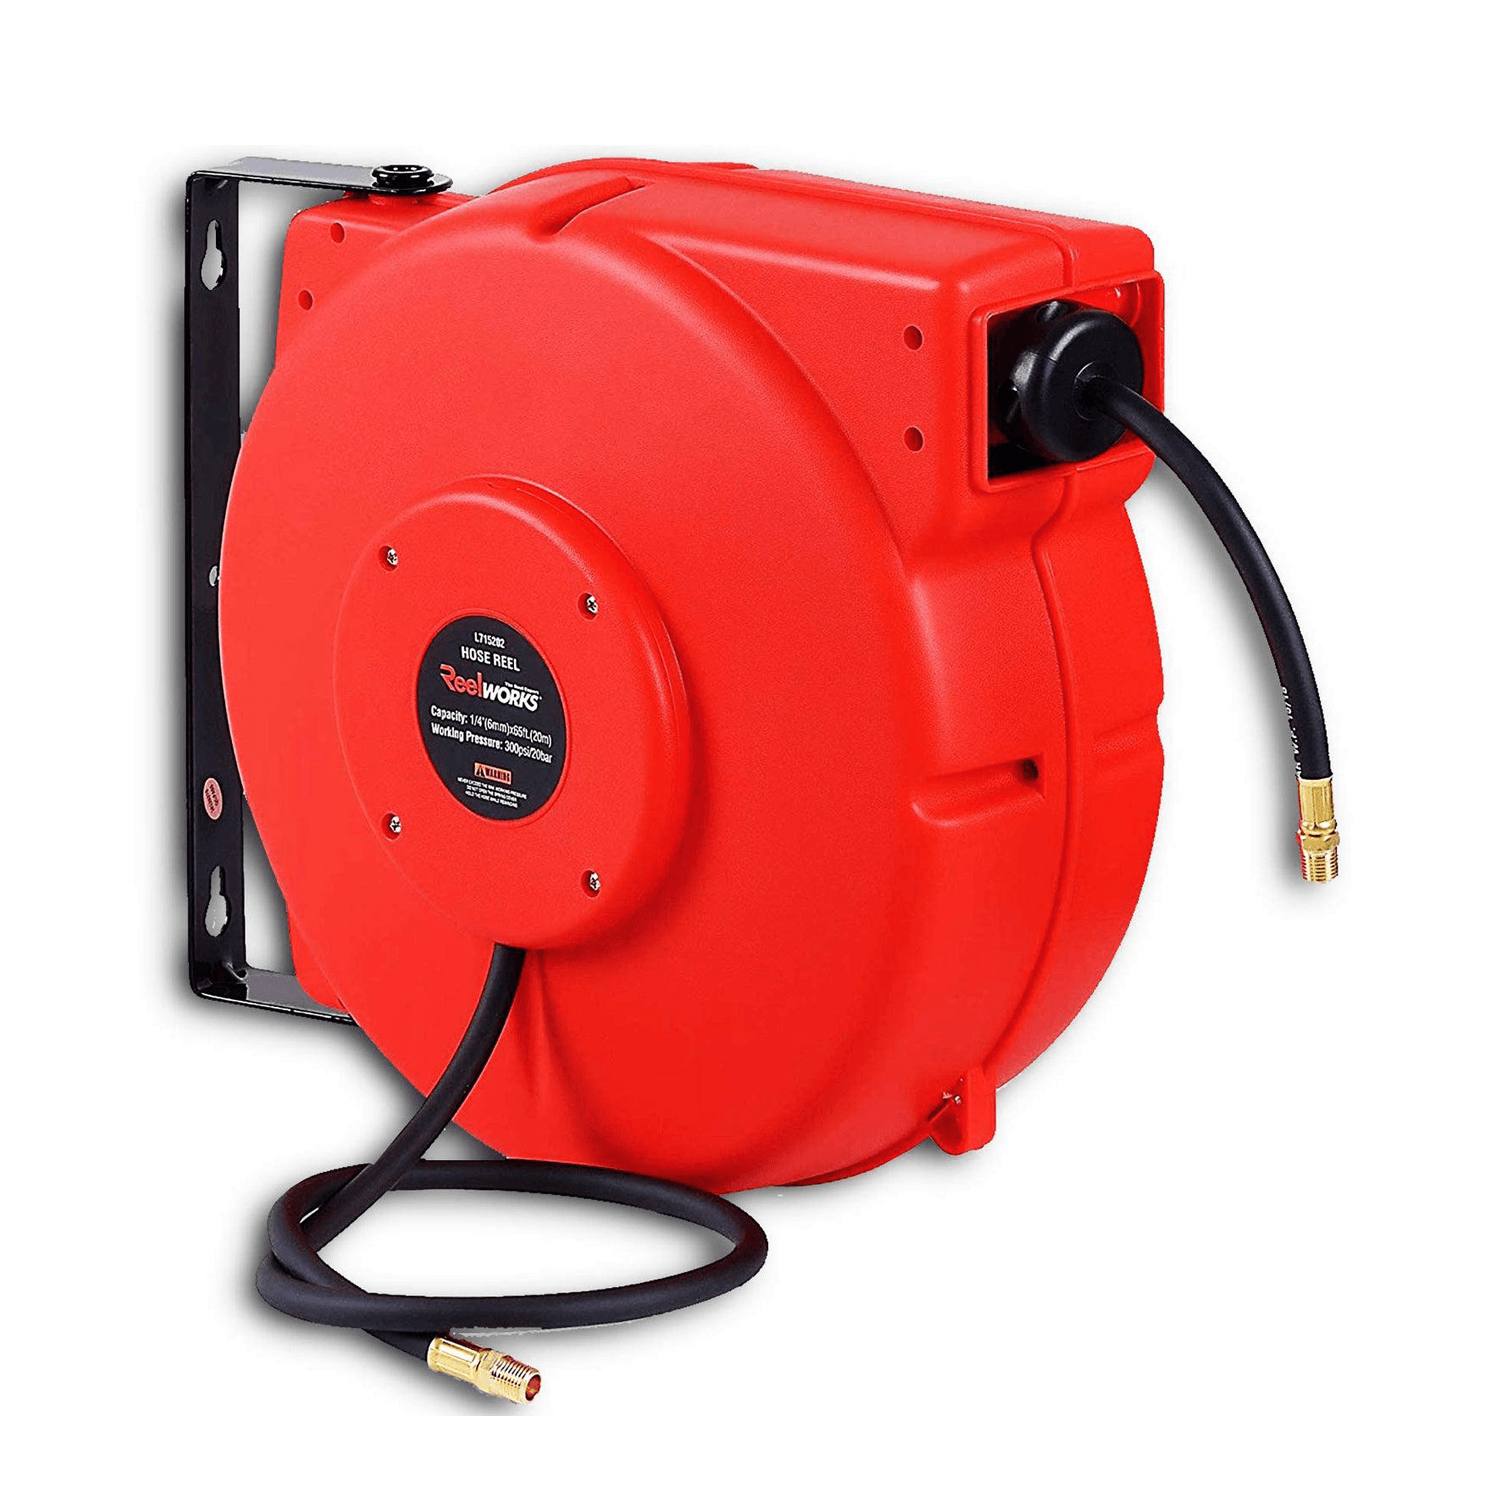 ReelWorks Mountable Retractable Air Hose Reel - 1/4 x 65'FT, 3' Ft Le